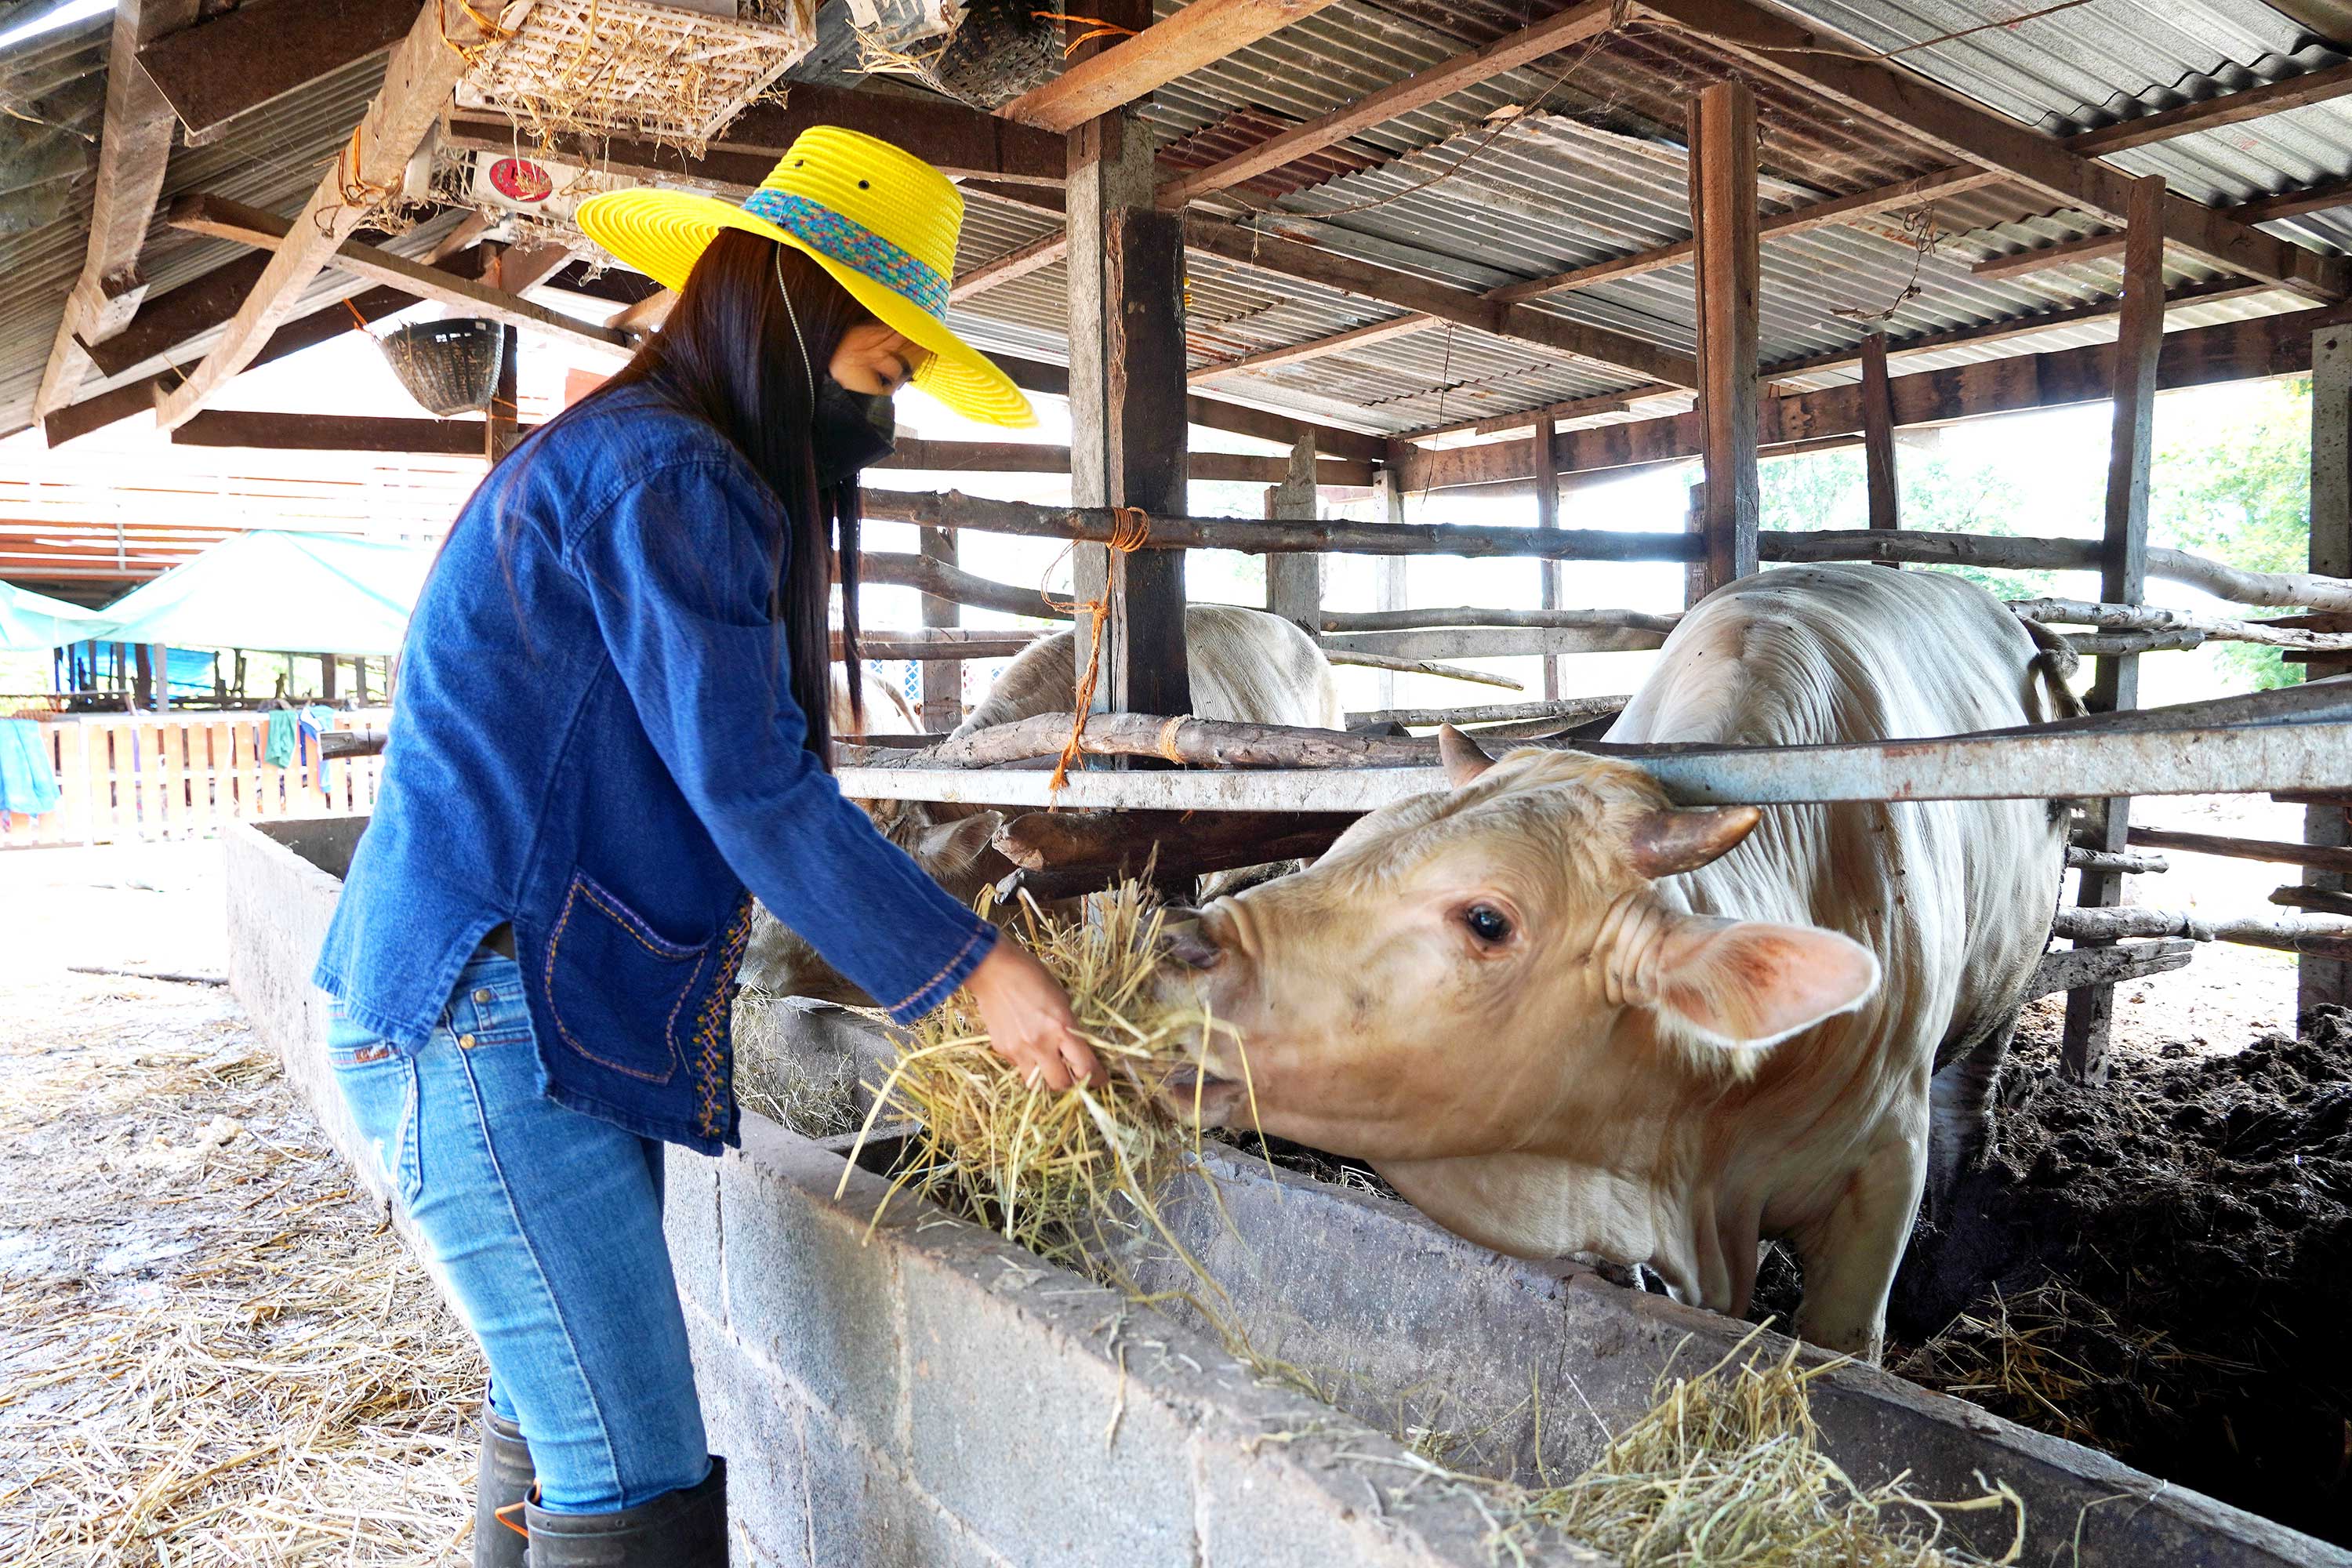 Piangjai Kaen-arsa’s morning routine is feeding her cattle with straw bales. Each cow can eat up to seven kilogrammes of dried straw per day.